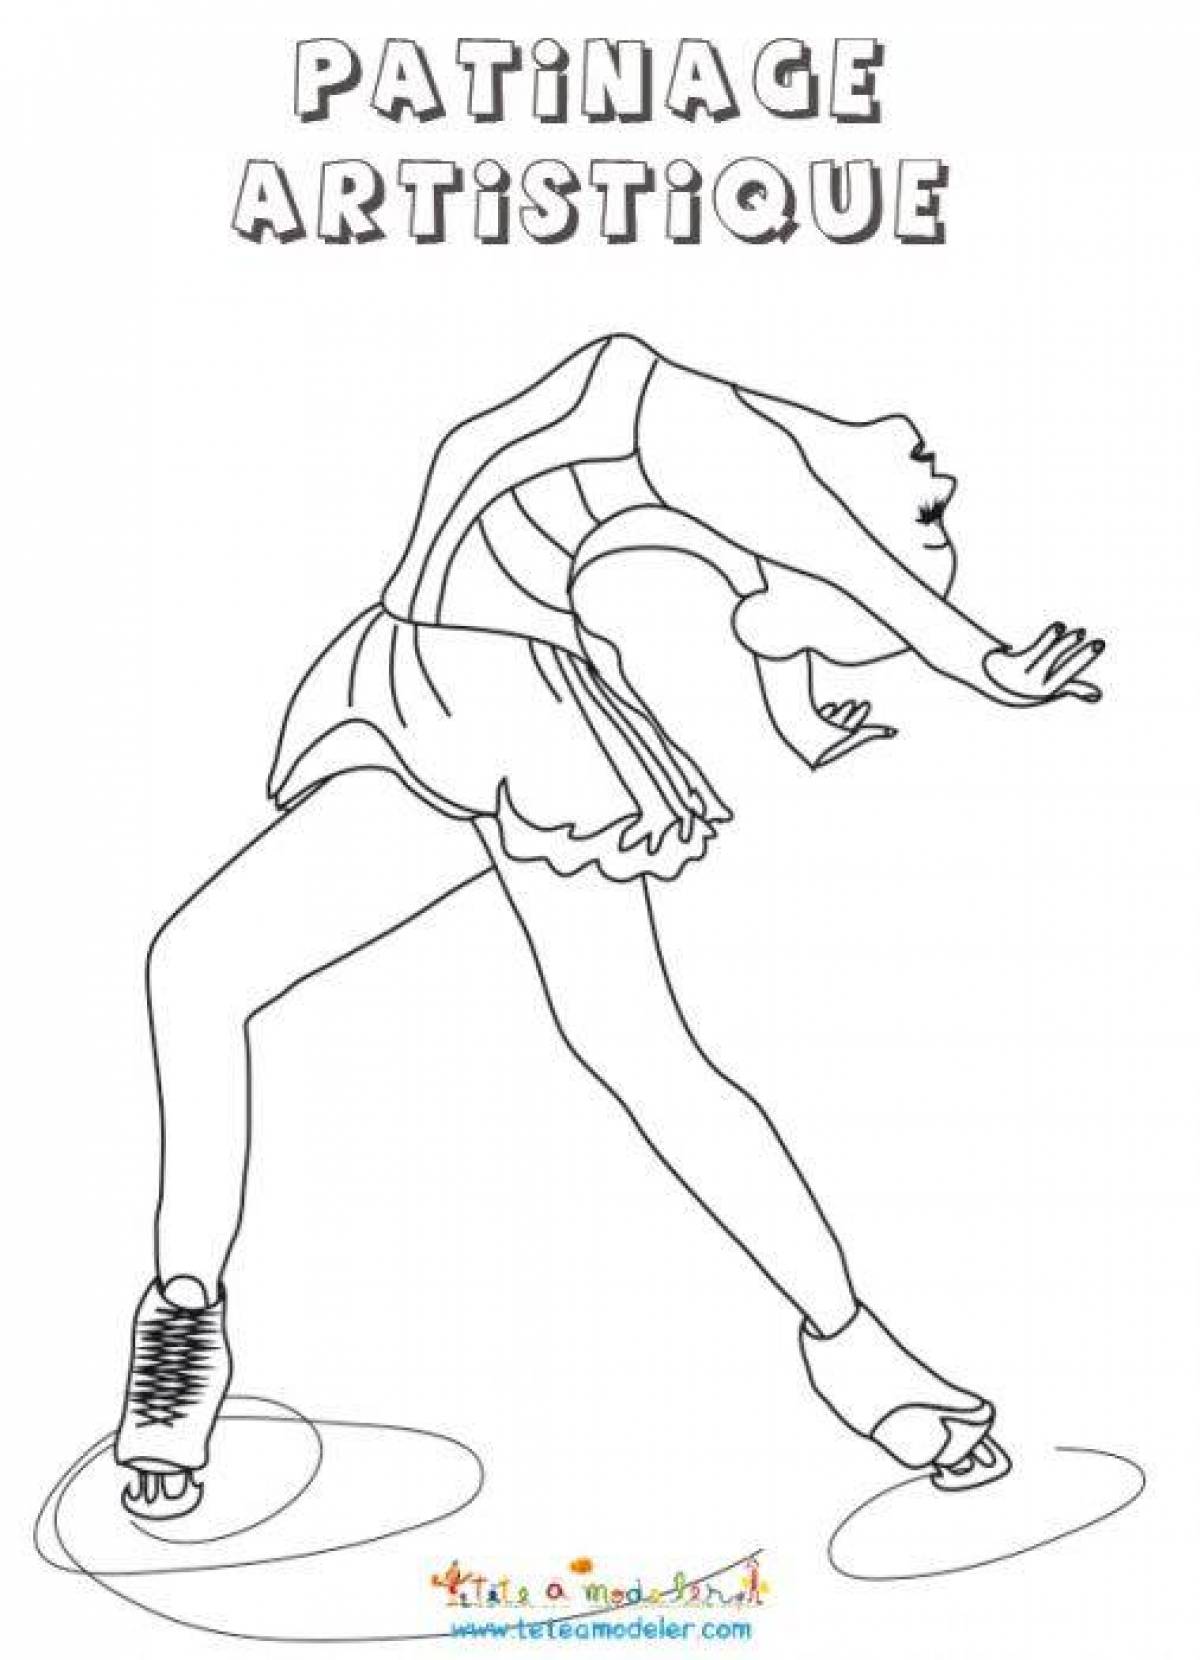 Coloring page exquisite figure skating